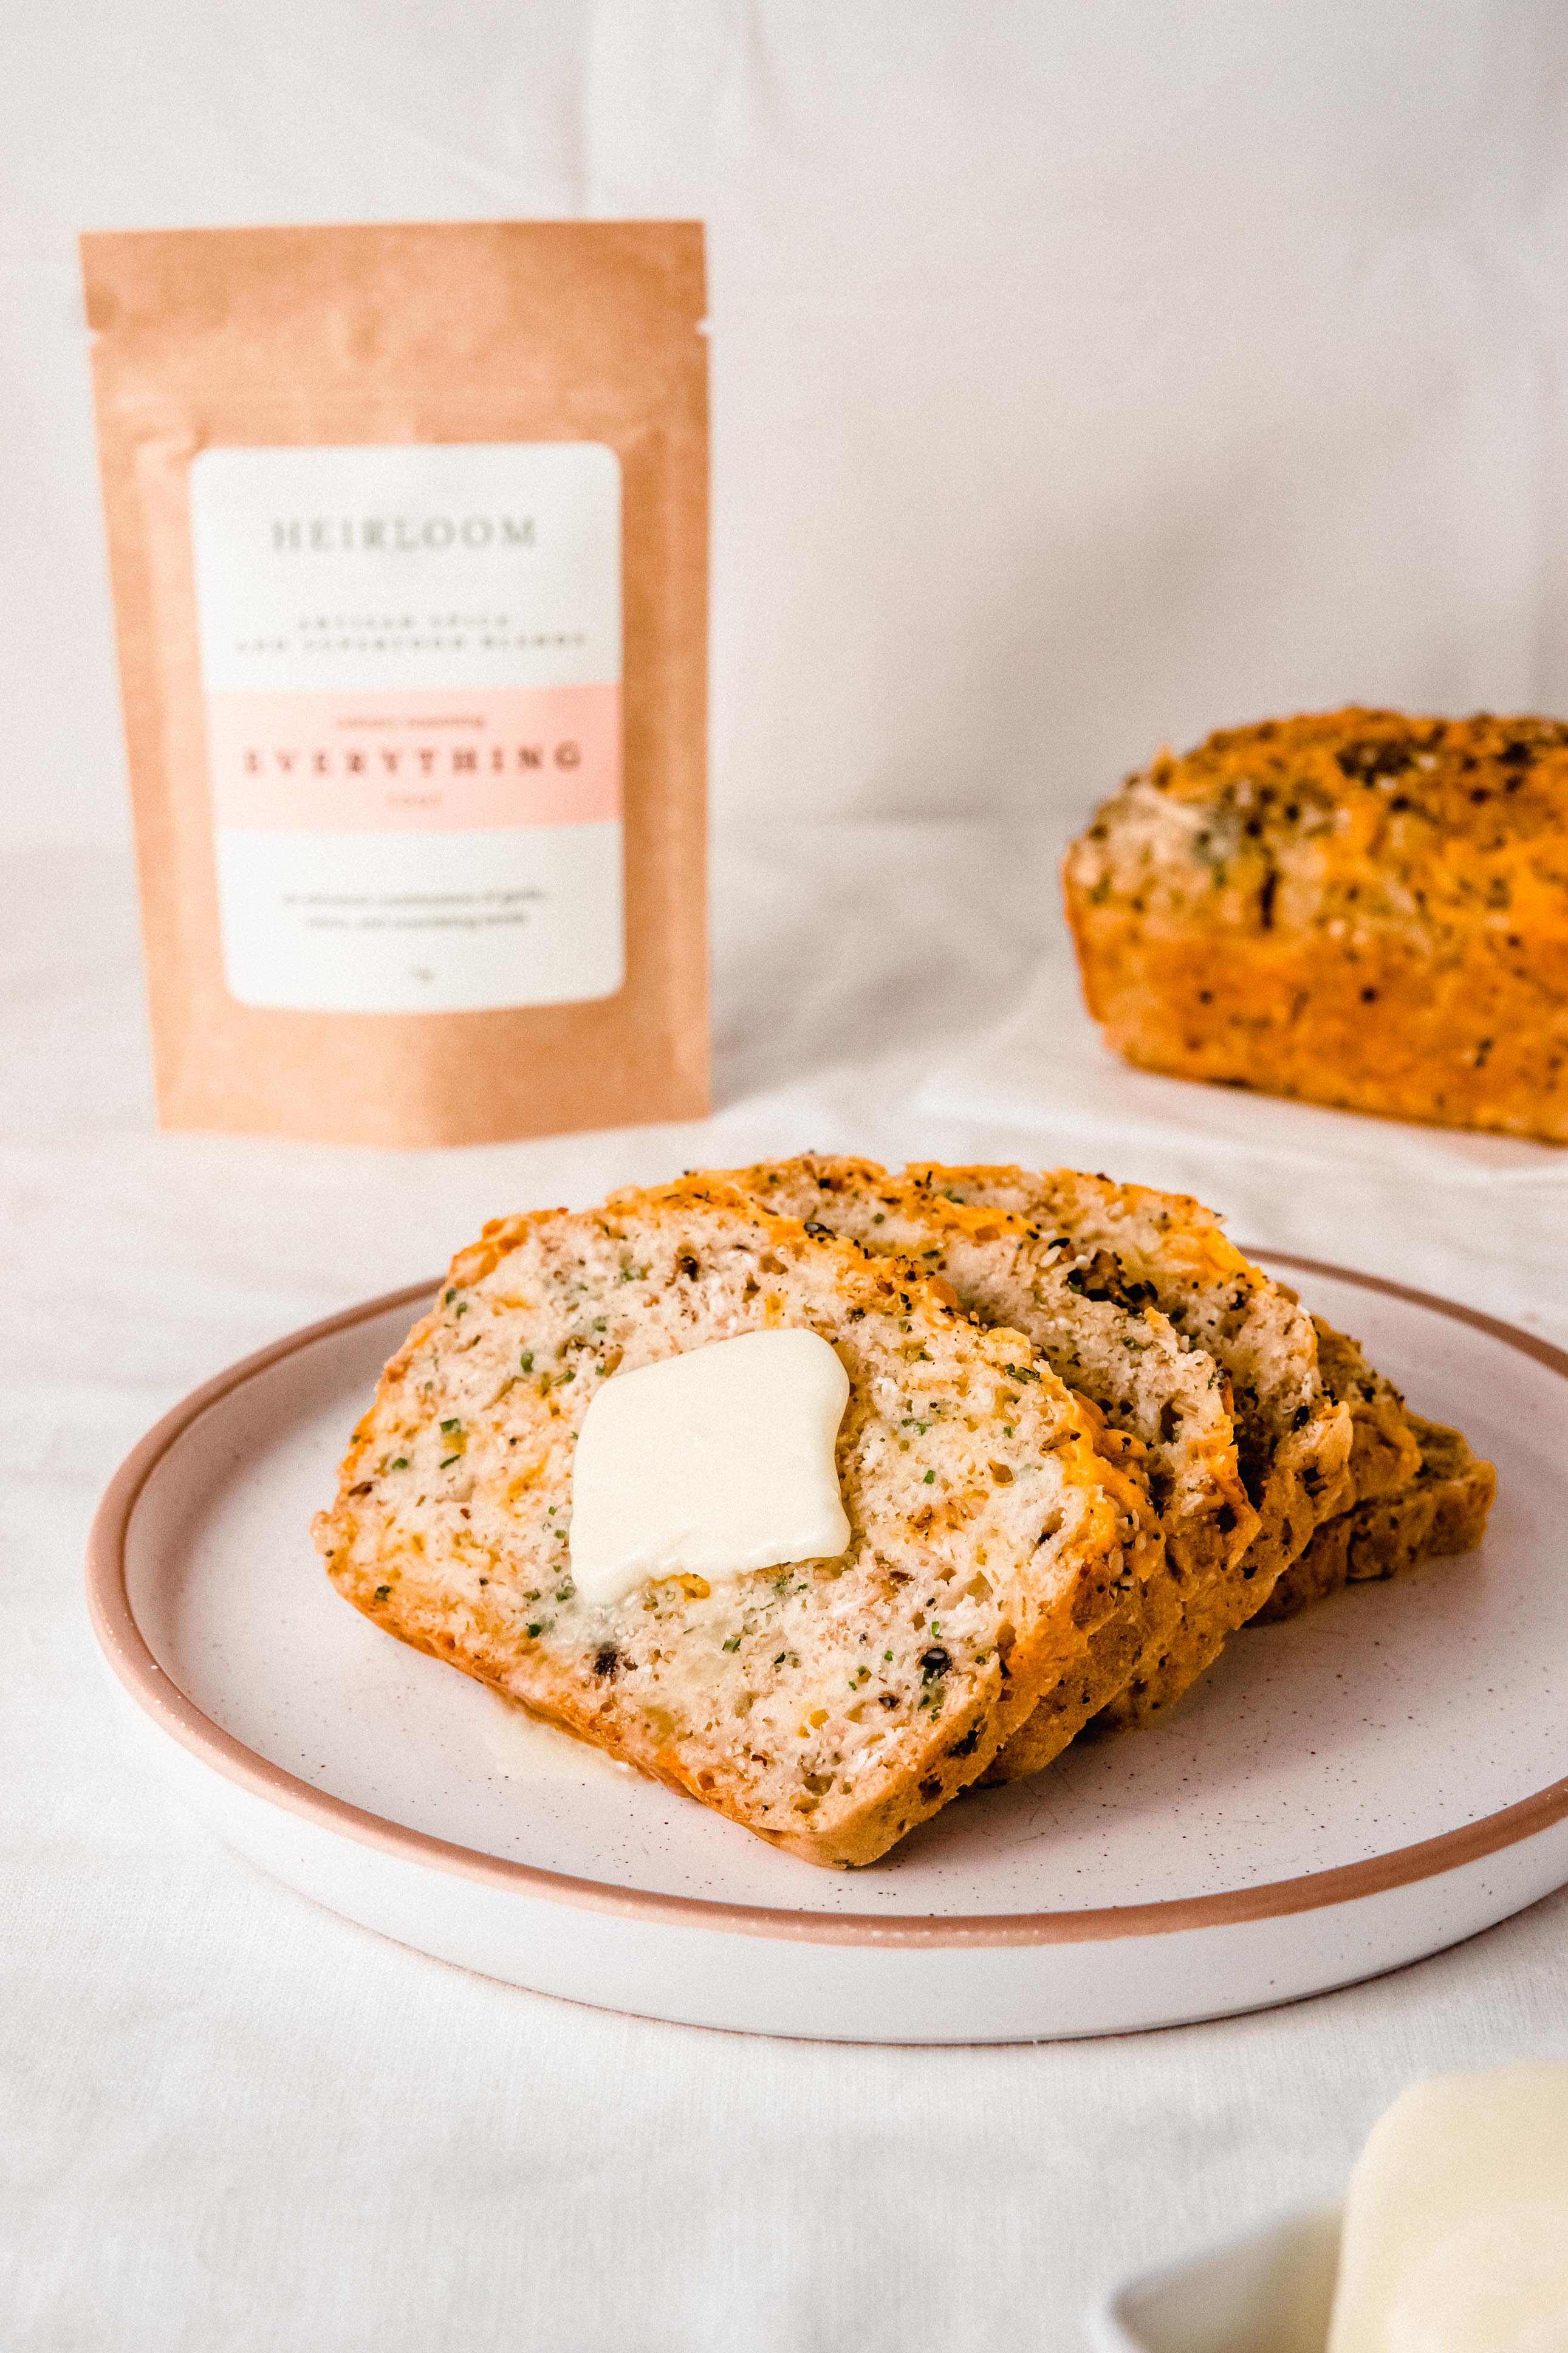 Everything Cheddar & Chive Beer Bread